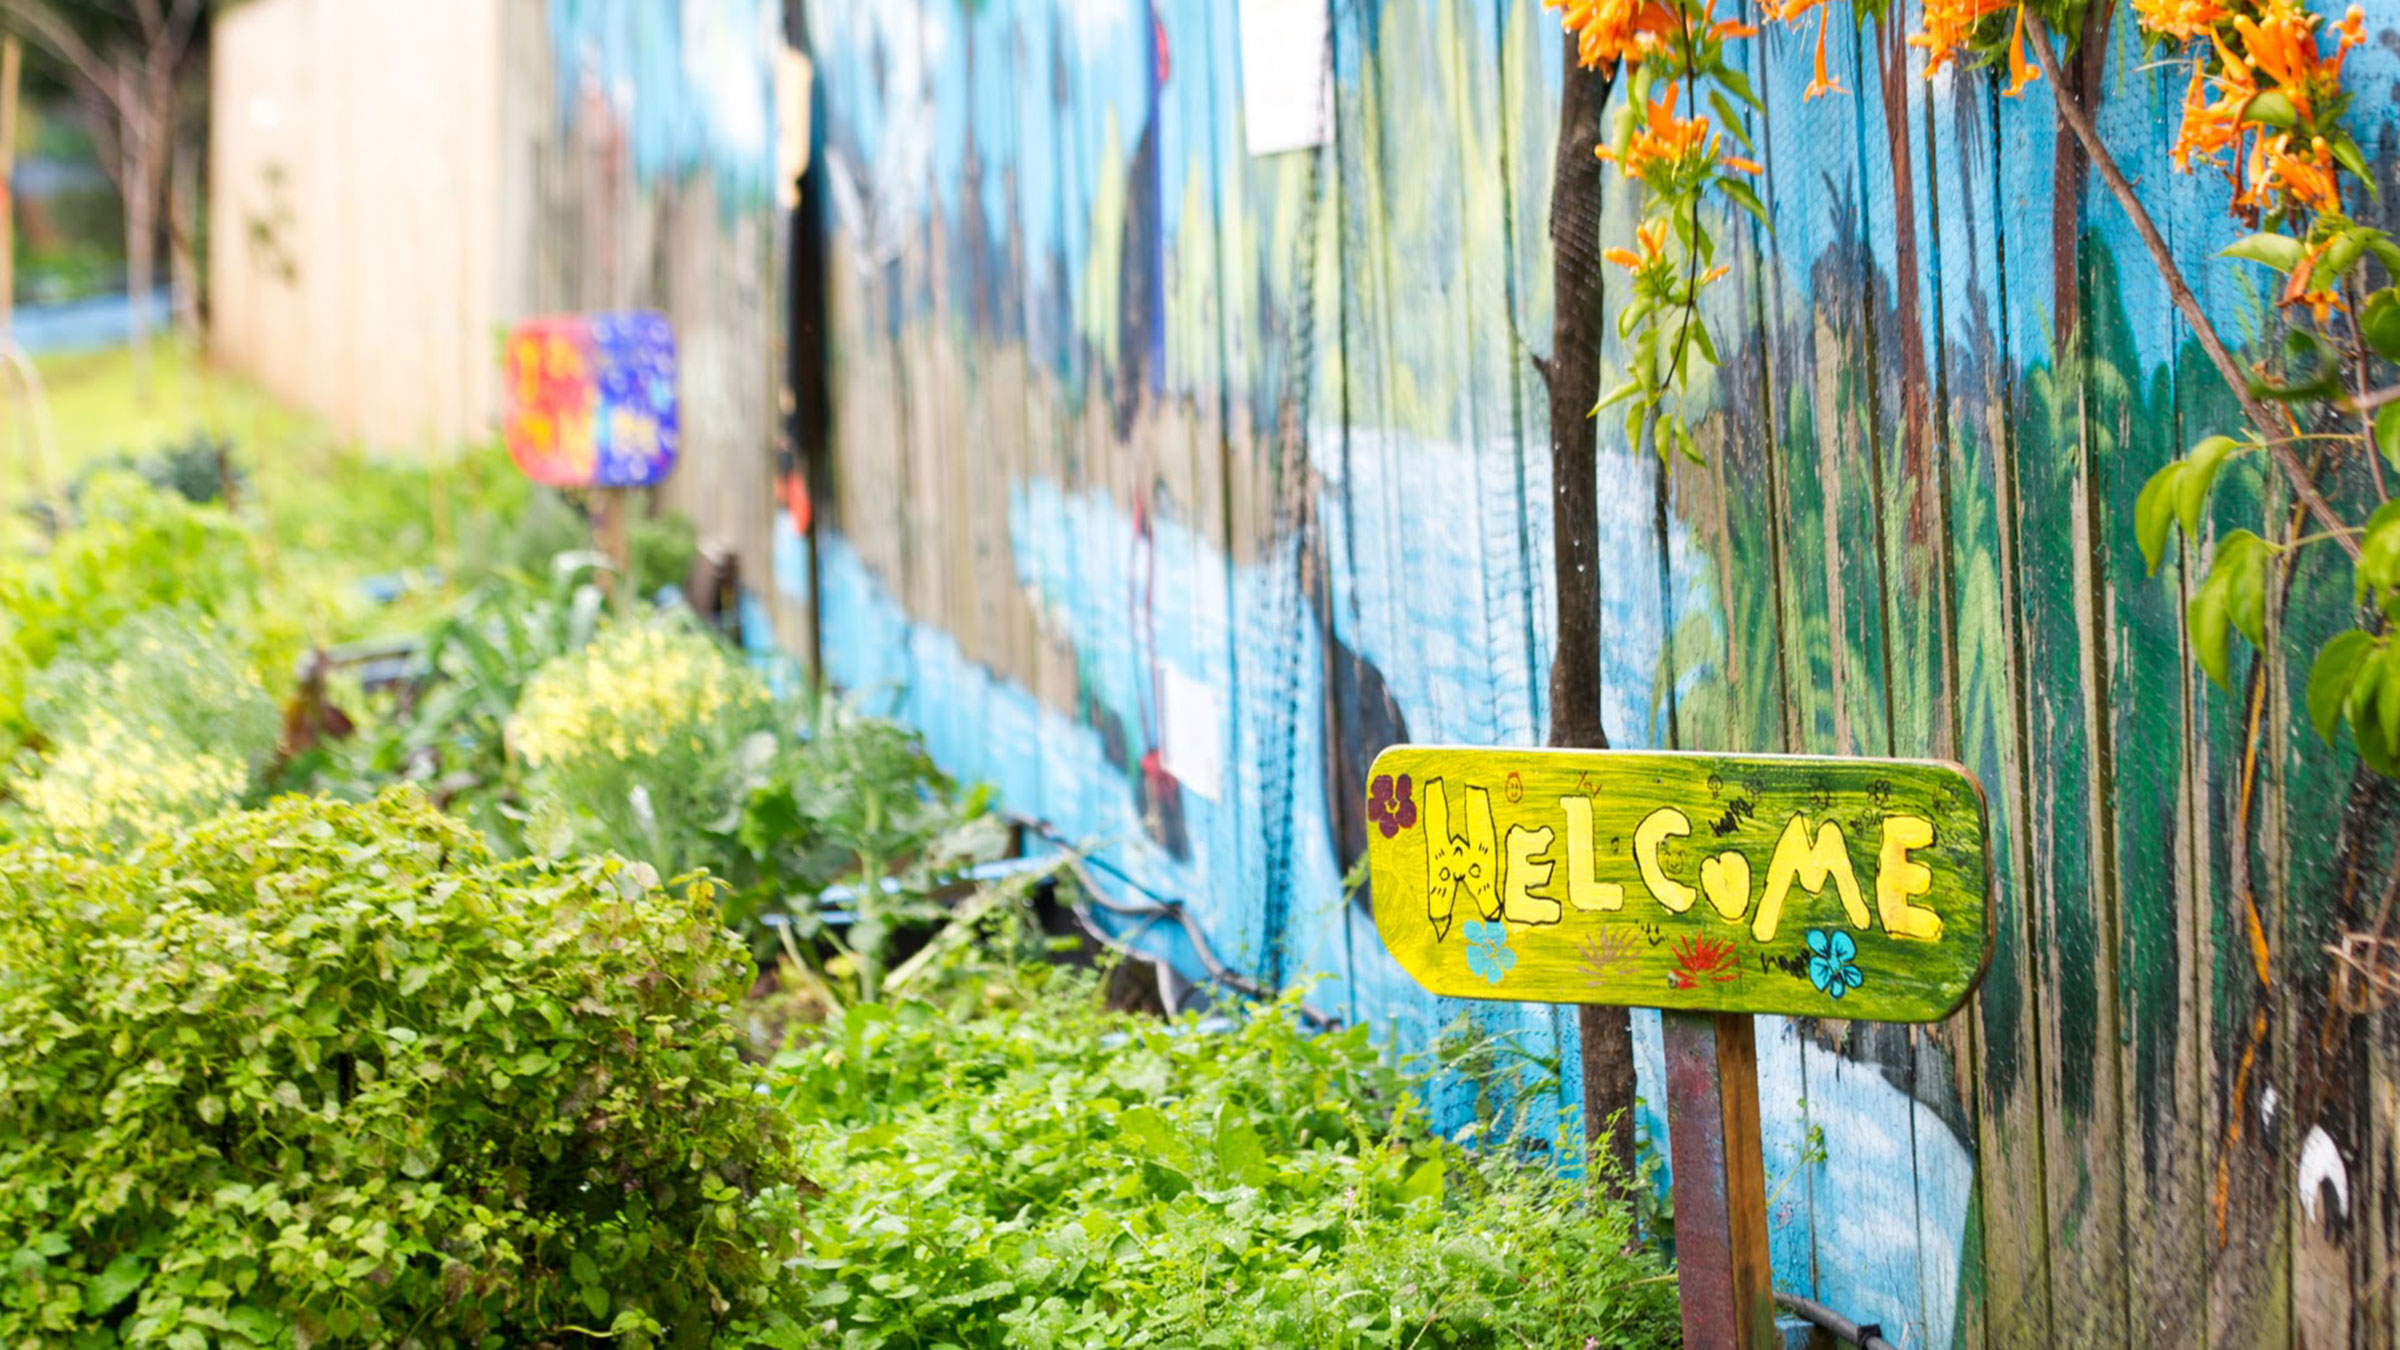 School garden with painted welcome sign